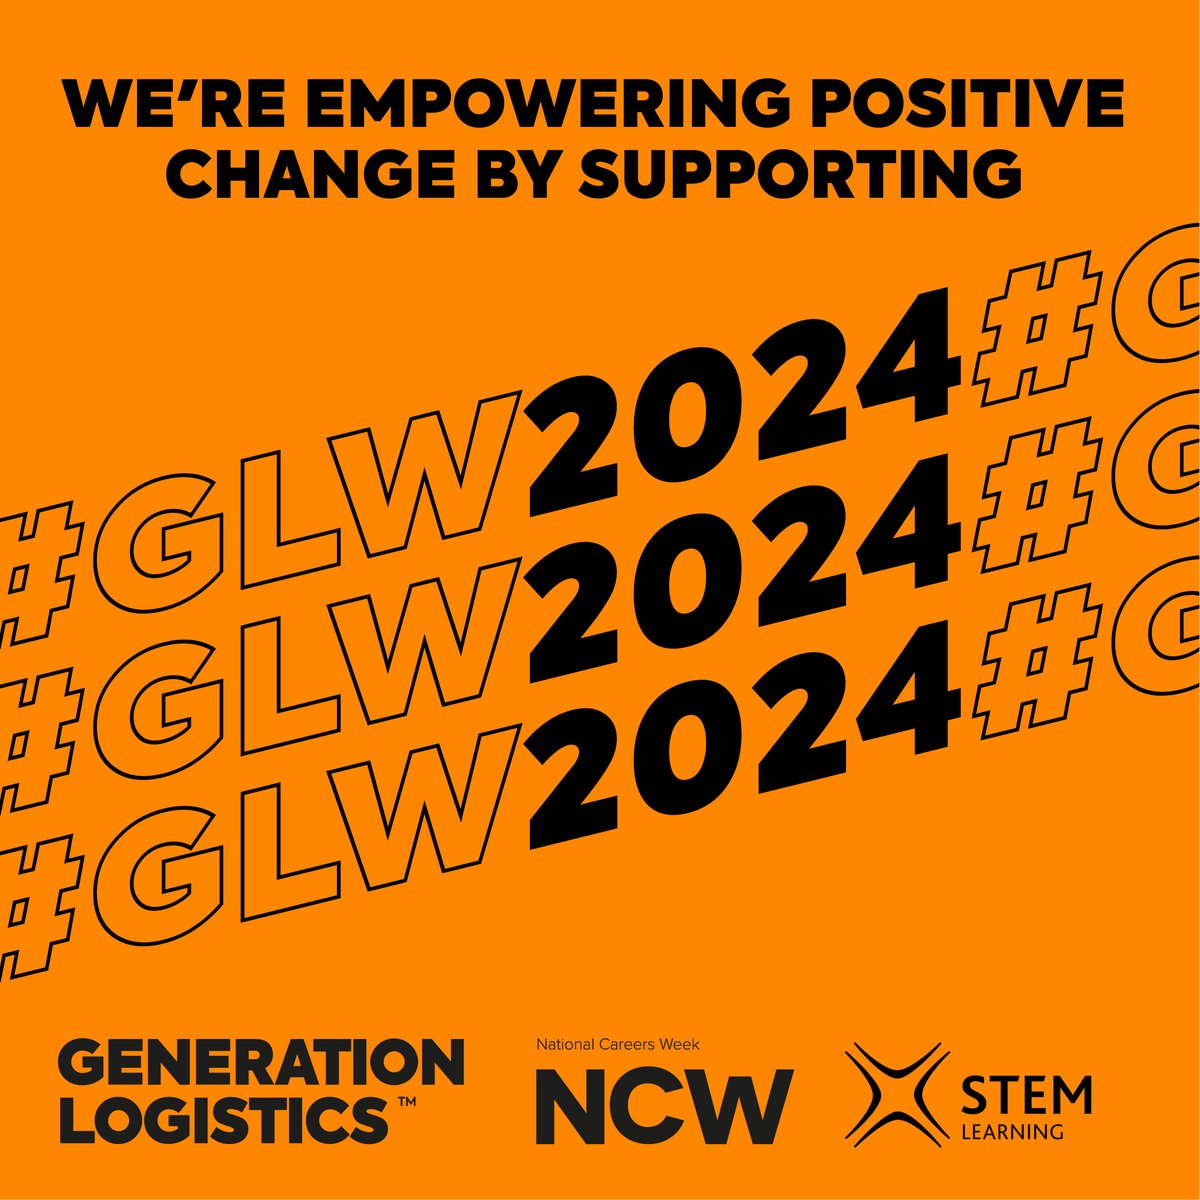 Join us.  

Empowering positive change through careers education.

What are you waiting for?

#GLW2024